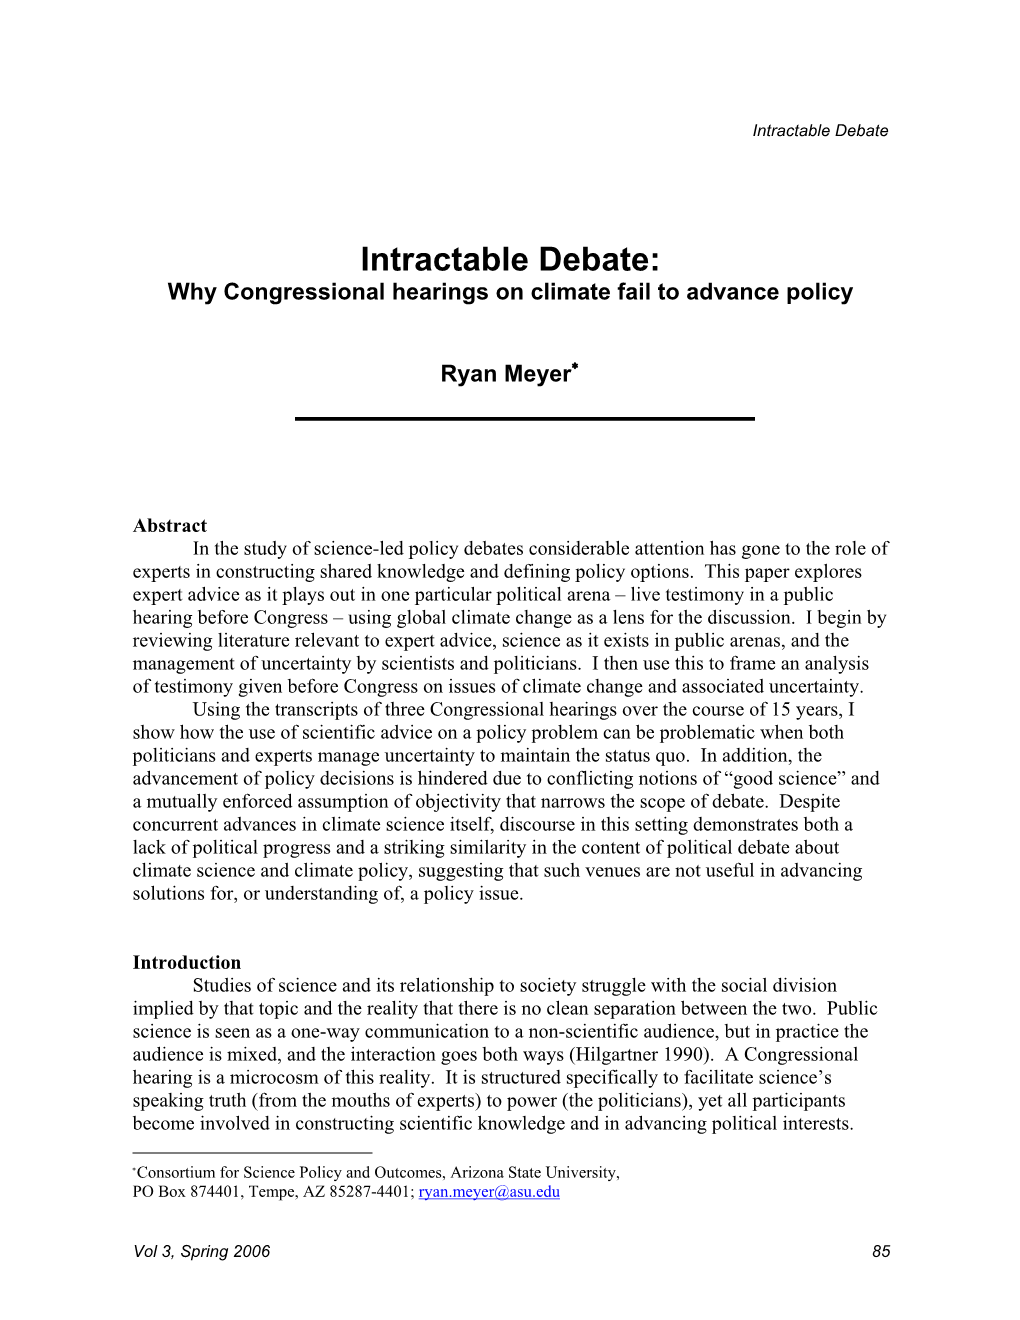 Intractable Debate: Why Congressional Hearings on Climate Fail to Advance Policy